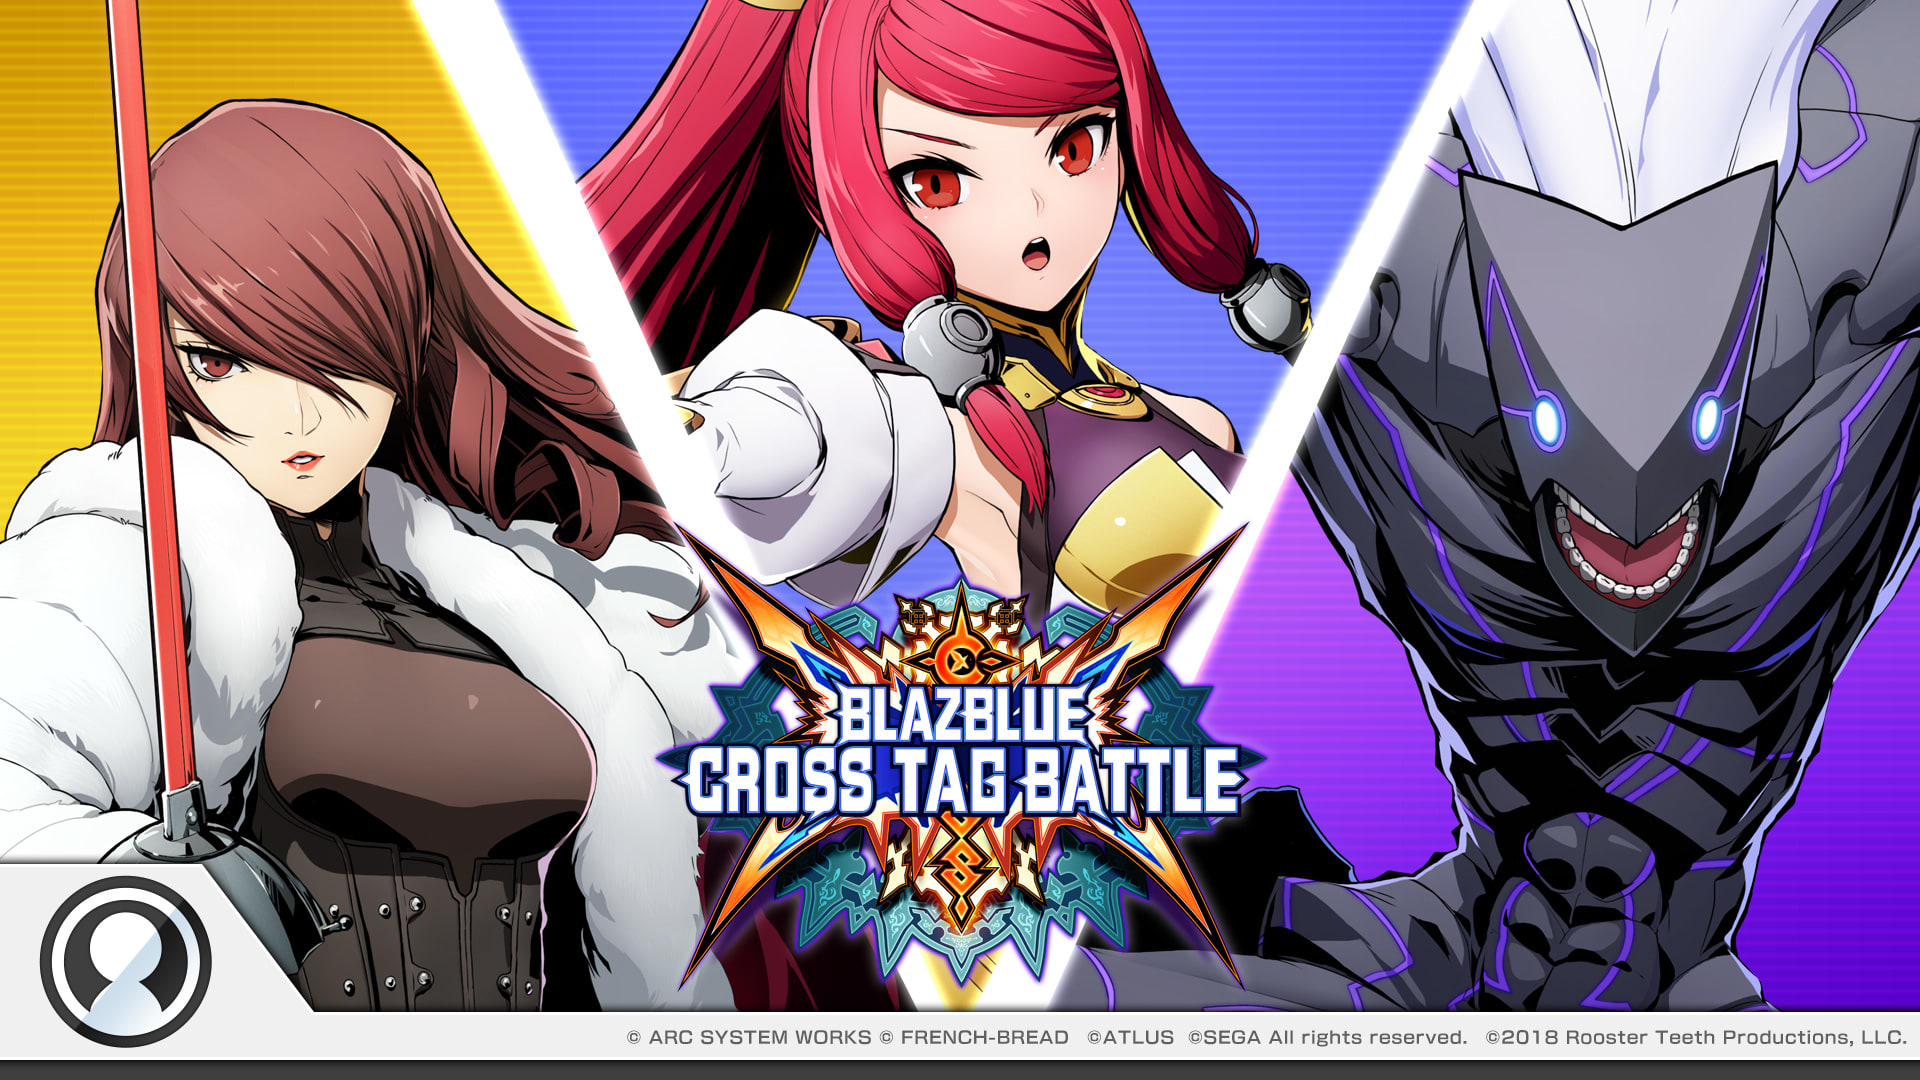 BlazBlue Cross Tag Battle Additional Character Pack Vol.4